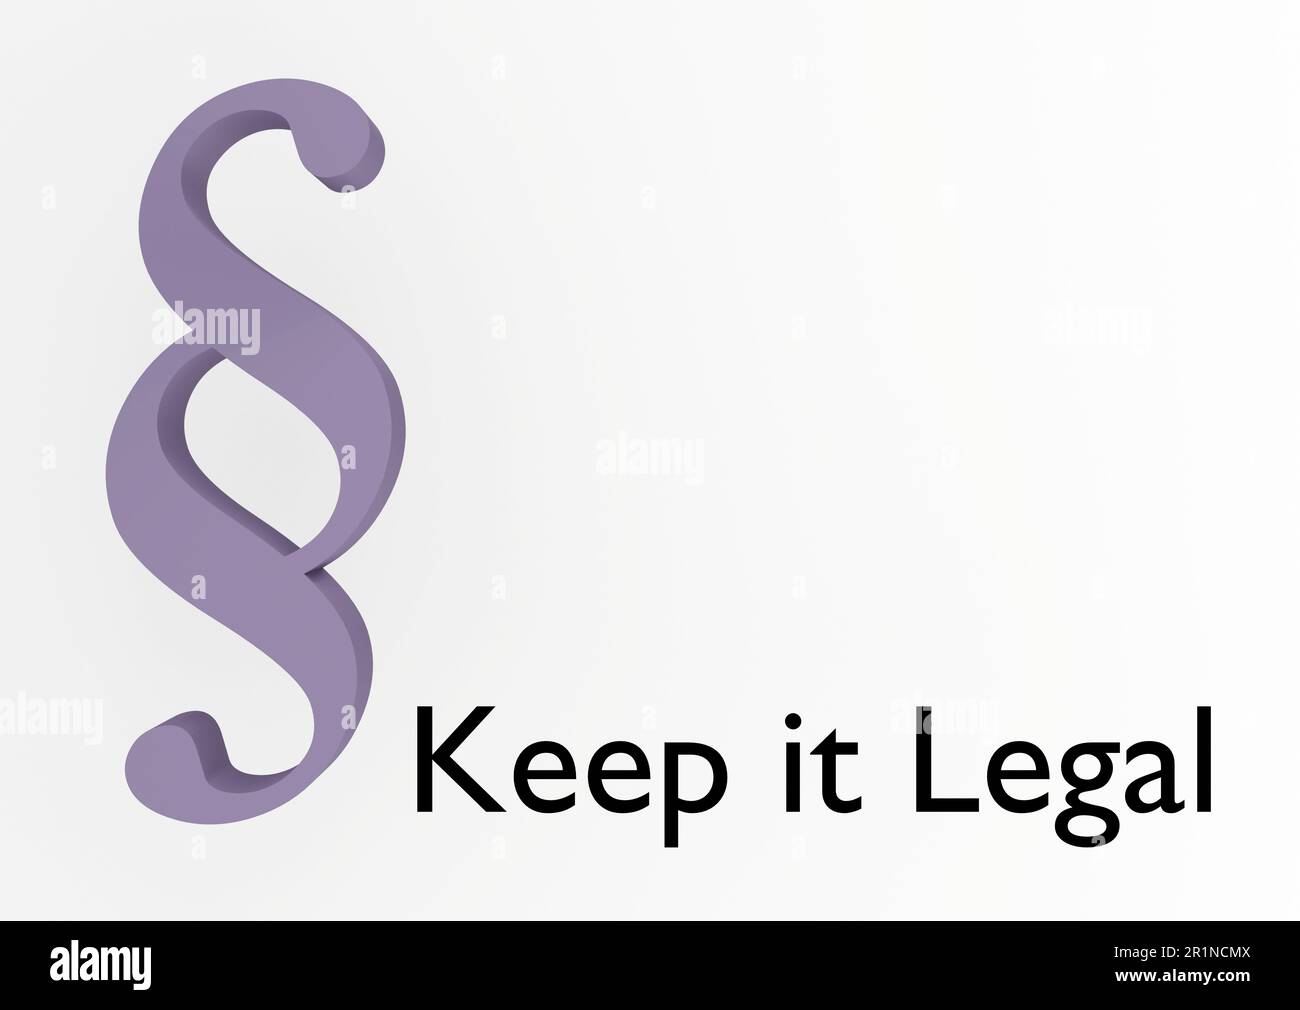 3D illustration of a purple section symbol along with the text Keep it Legal Stock Photo